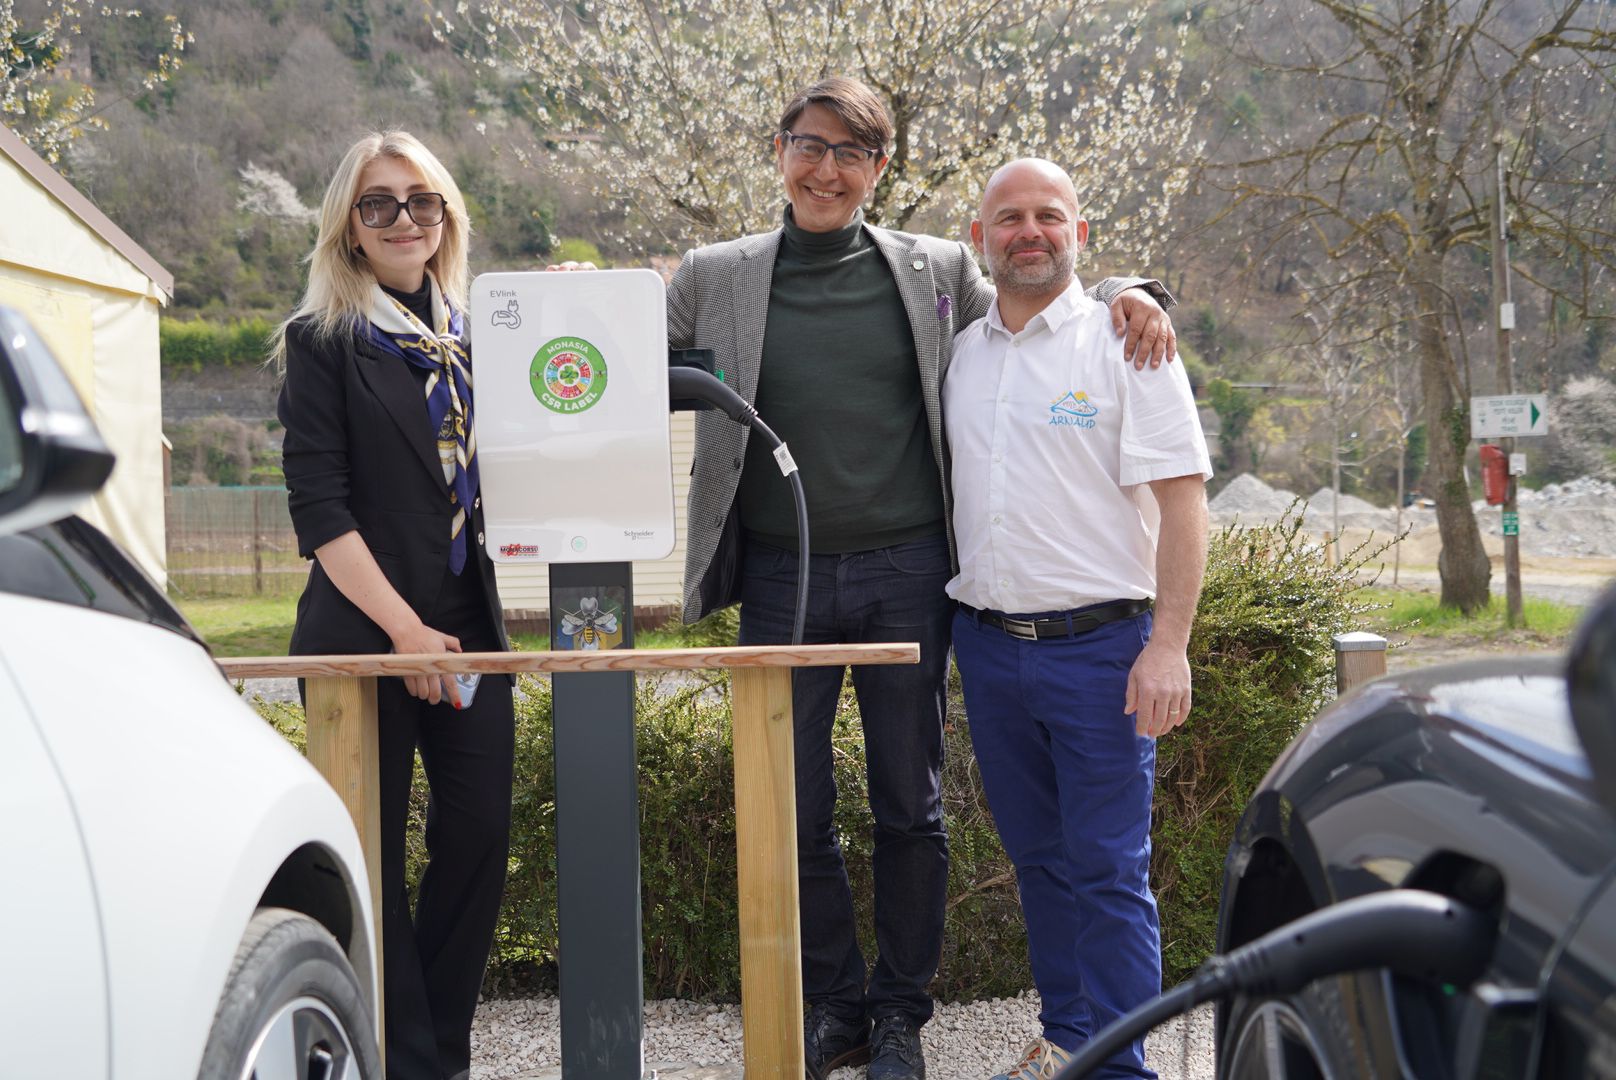 Power to the plug-ins celebrated at the Camping Les Templiers made possible by Lepton Charity Foundation with a media support of MonAsia Association pic